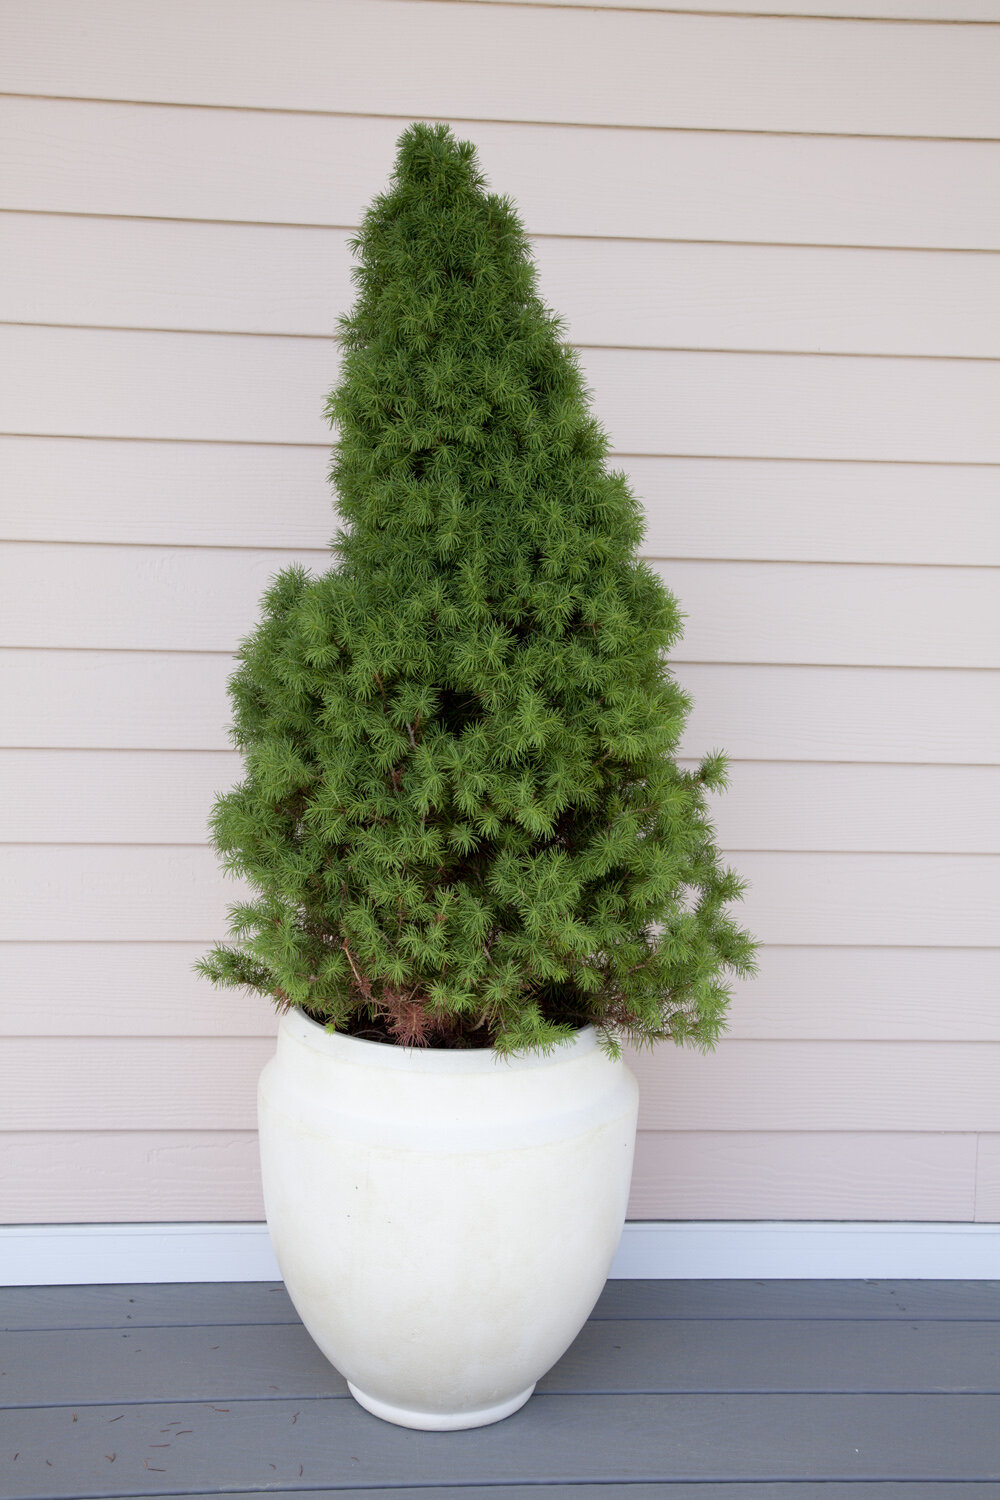 Potted Pine.jpg